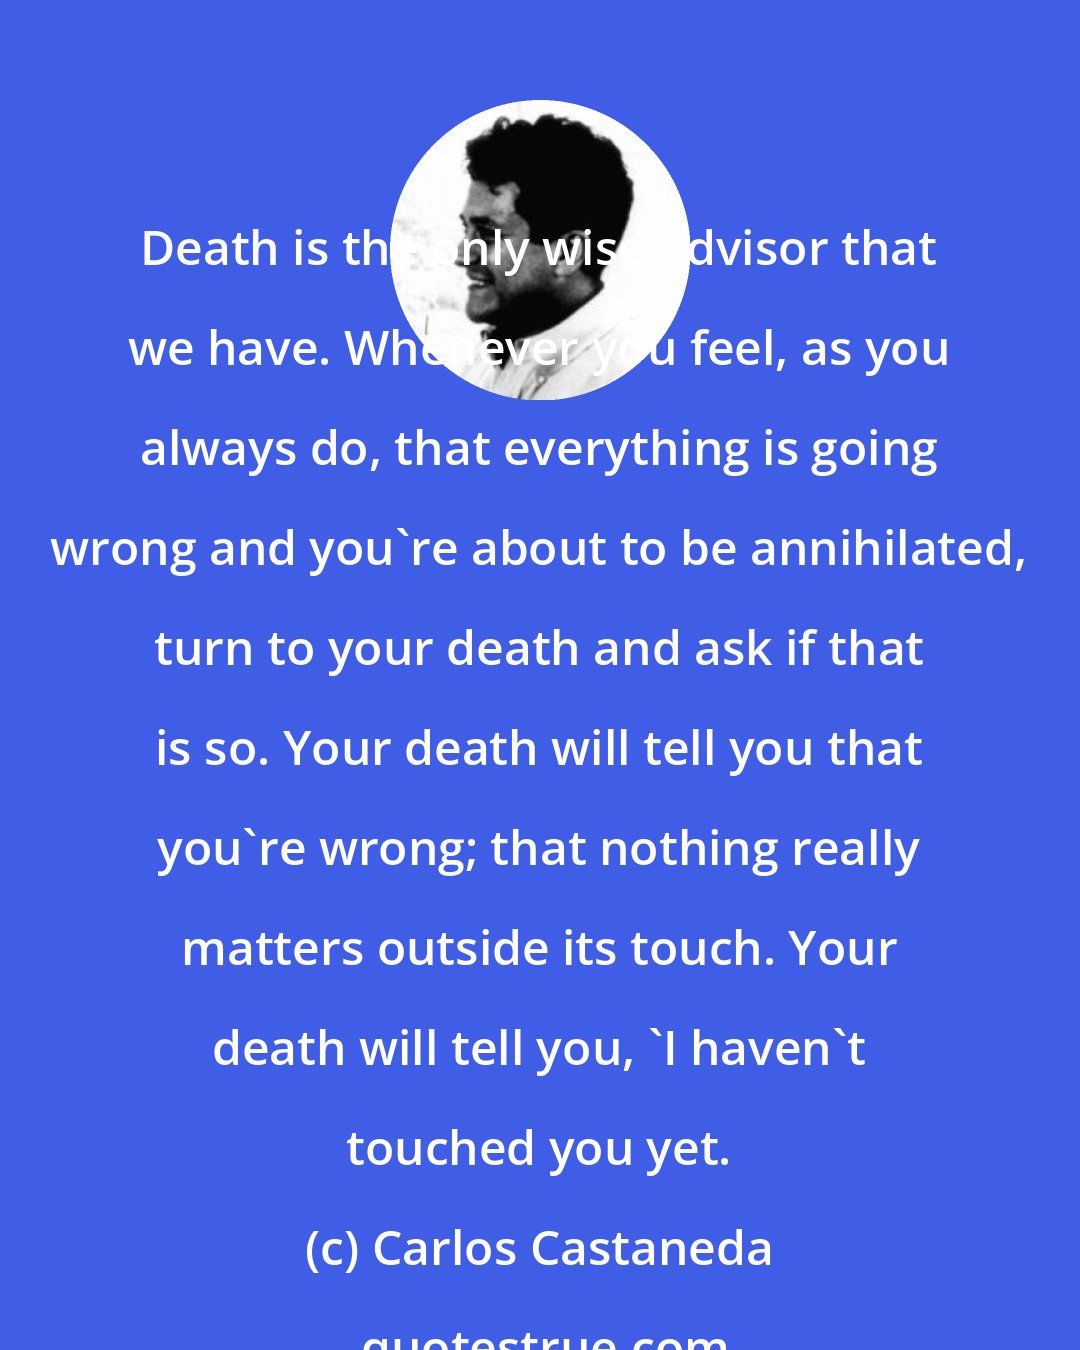 Carlos Castaneda: Death is the only wise advisor that we have. Whenever you feel, as you always do, that everything is going wrong and you're about to be annihilated, turn to your death and ask if that is so. Your death will tell you that you're wrong; that nothing really matters outside its touch. Your death will tell you, 'I haven't touched you yet.